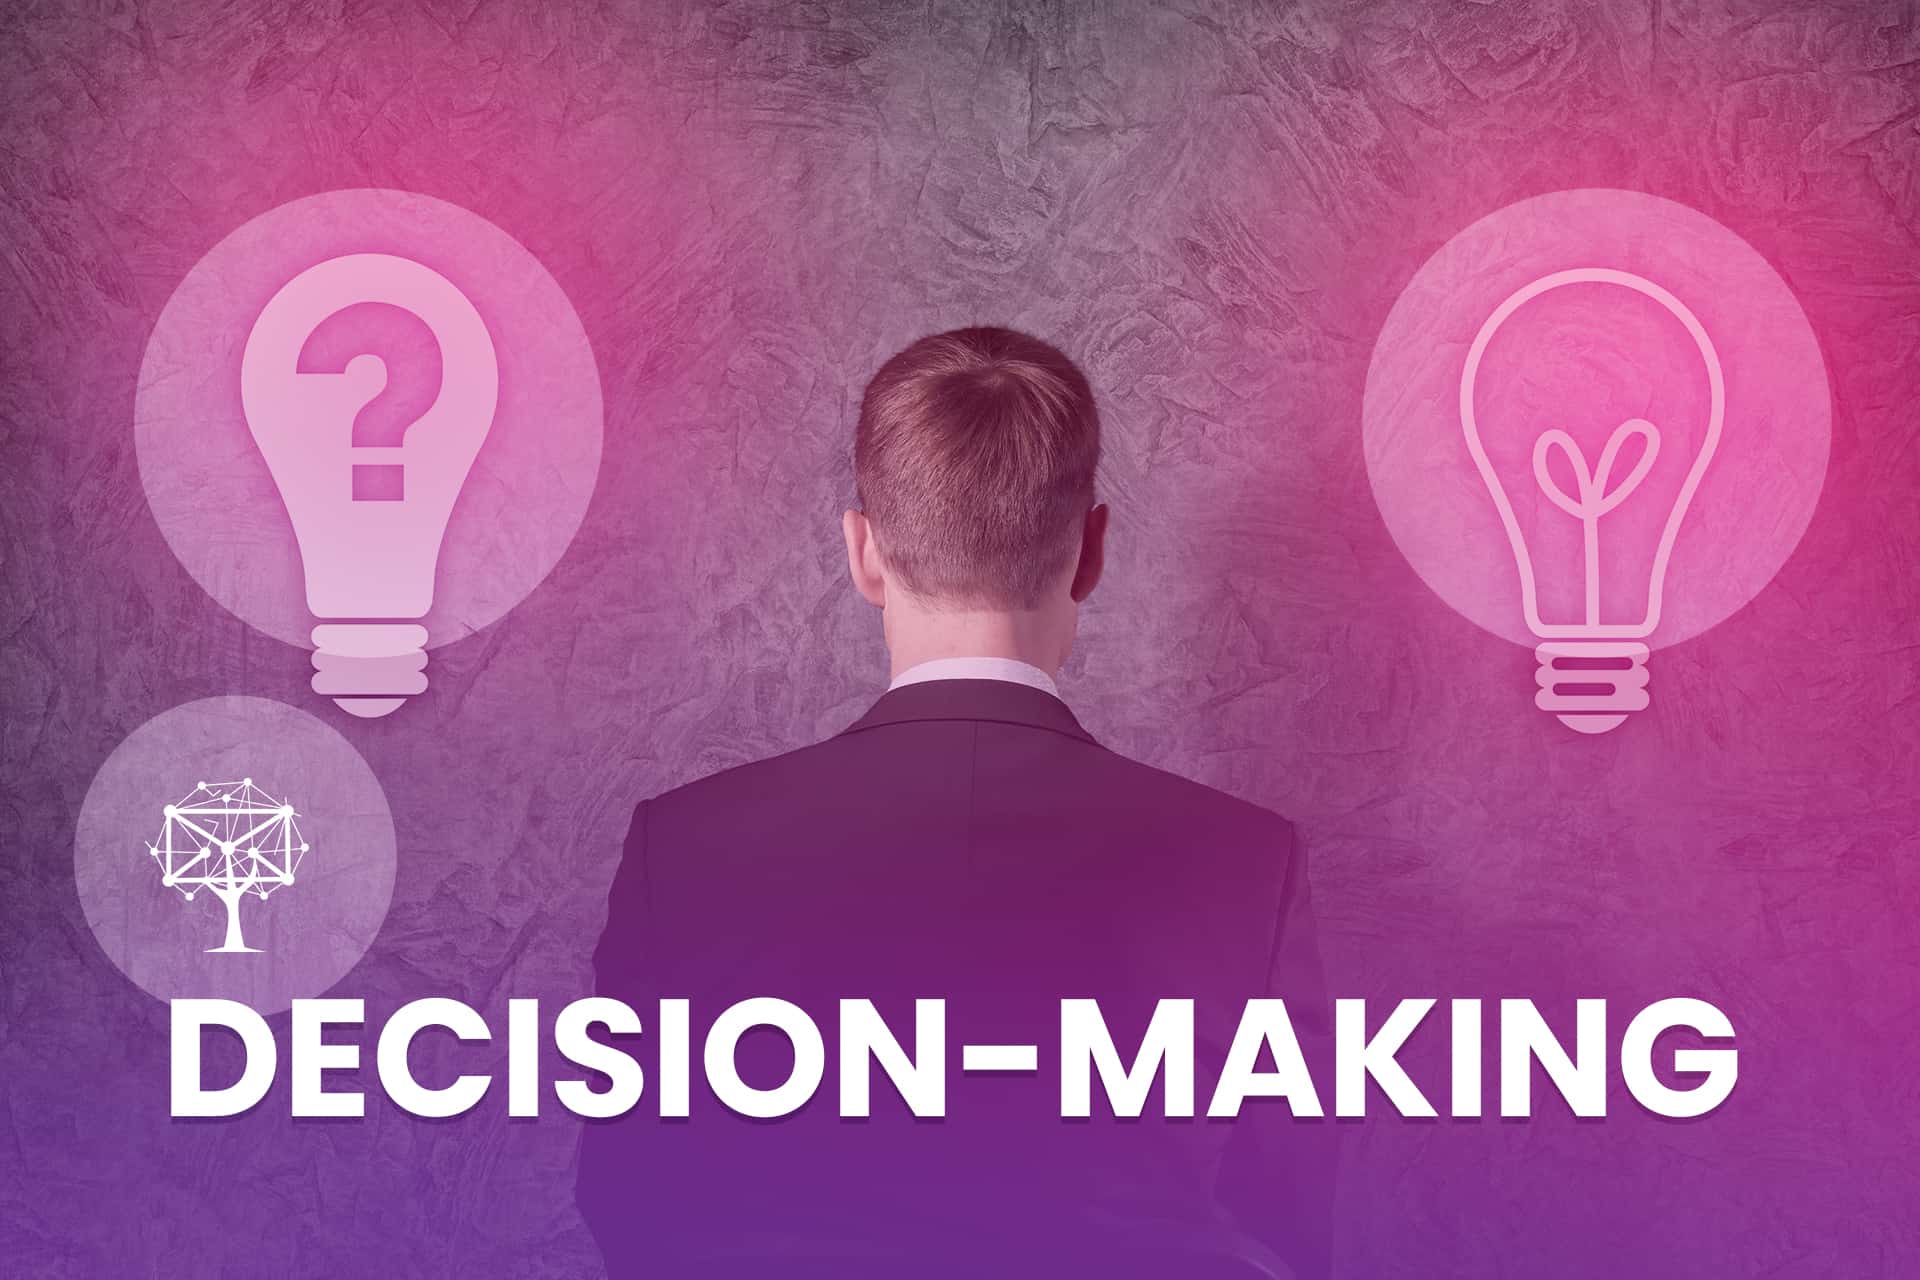 Making decisions is a customer service skill